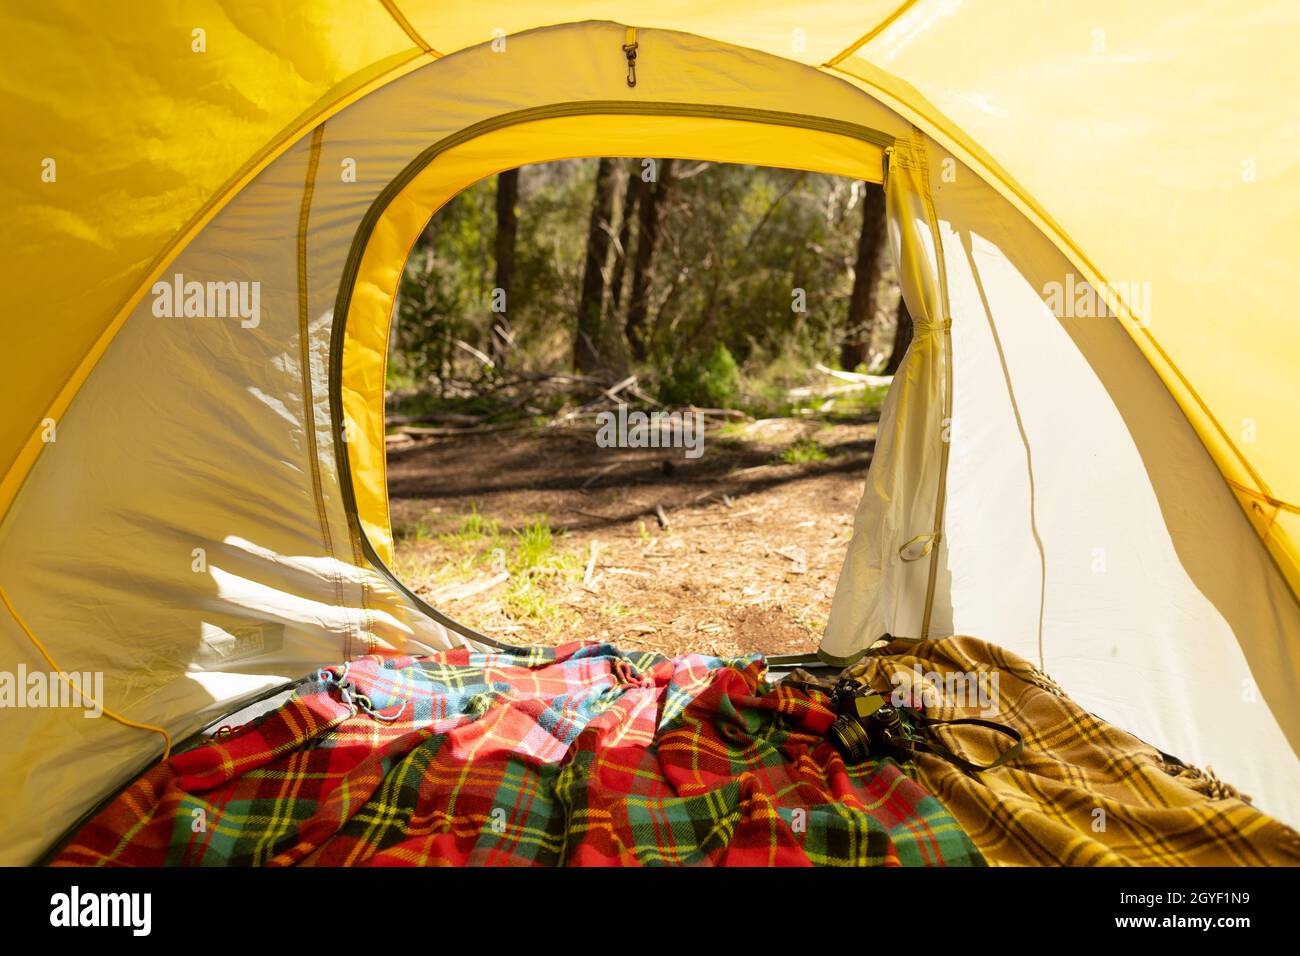 Inside of the yellow tent in the country side Stock Photo